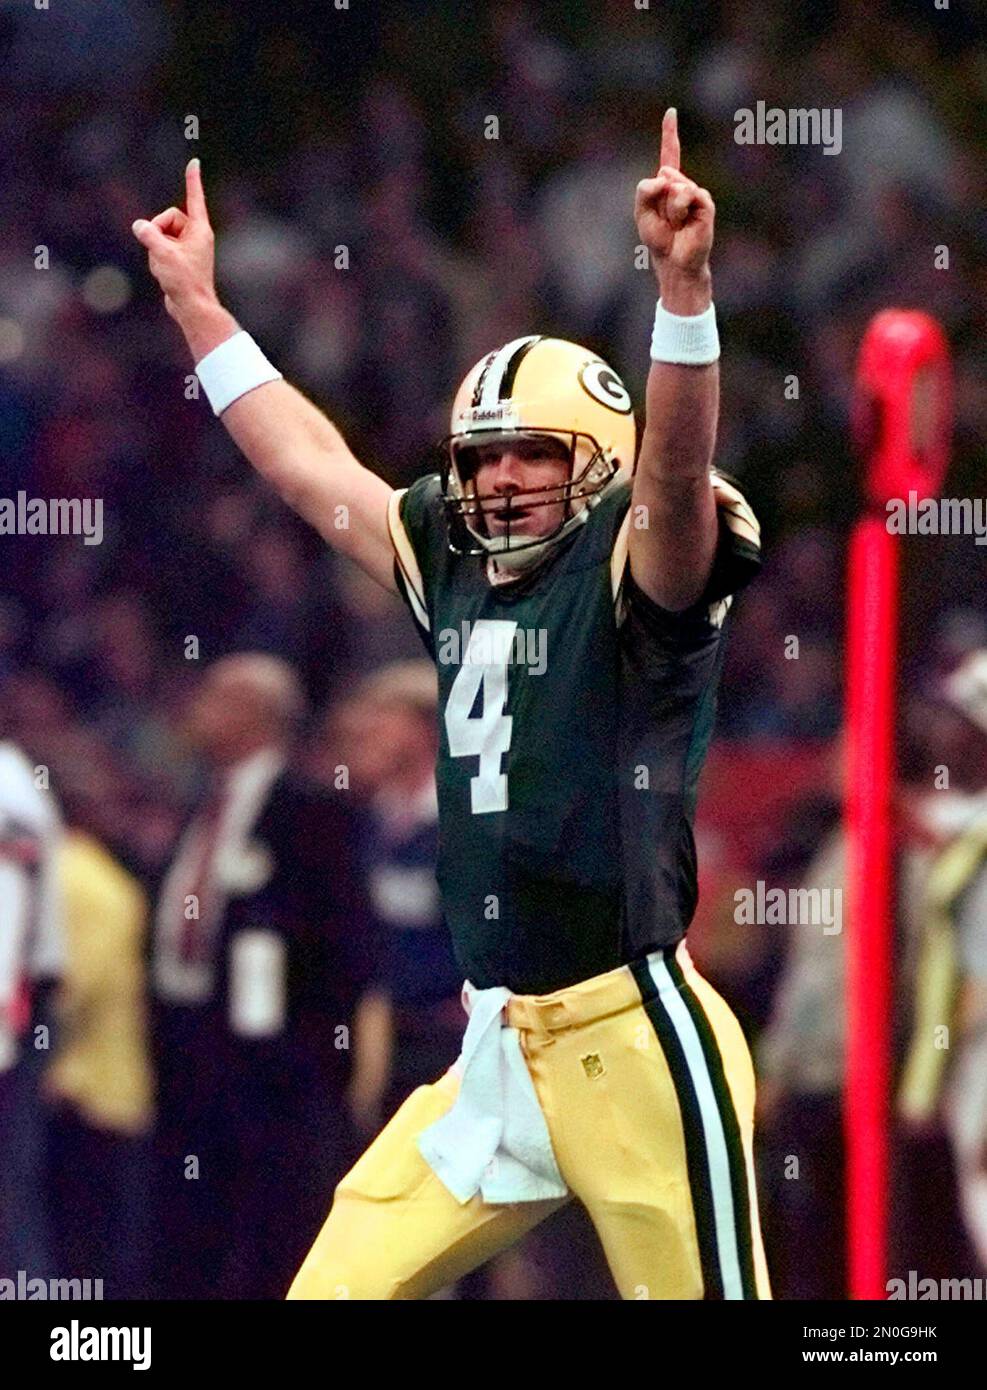 FILE - In this Jan. 26, 1997, file photo, Green Bay Packers quarterback ...